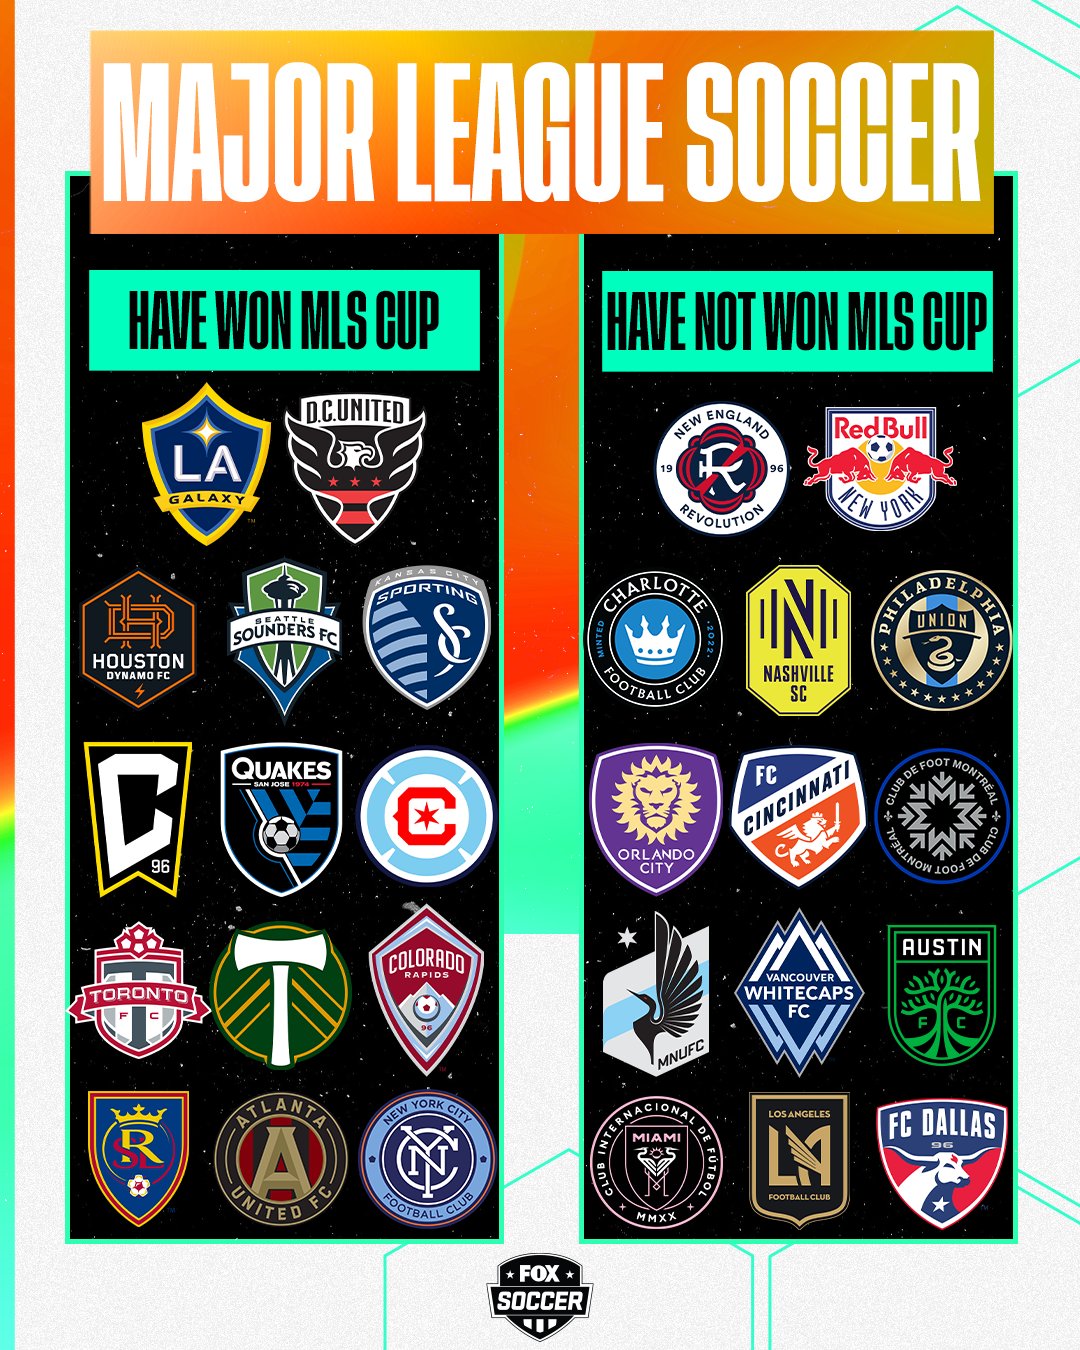 What teams have never won MLS Cup